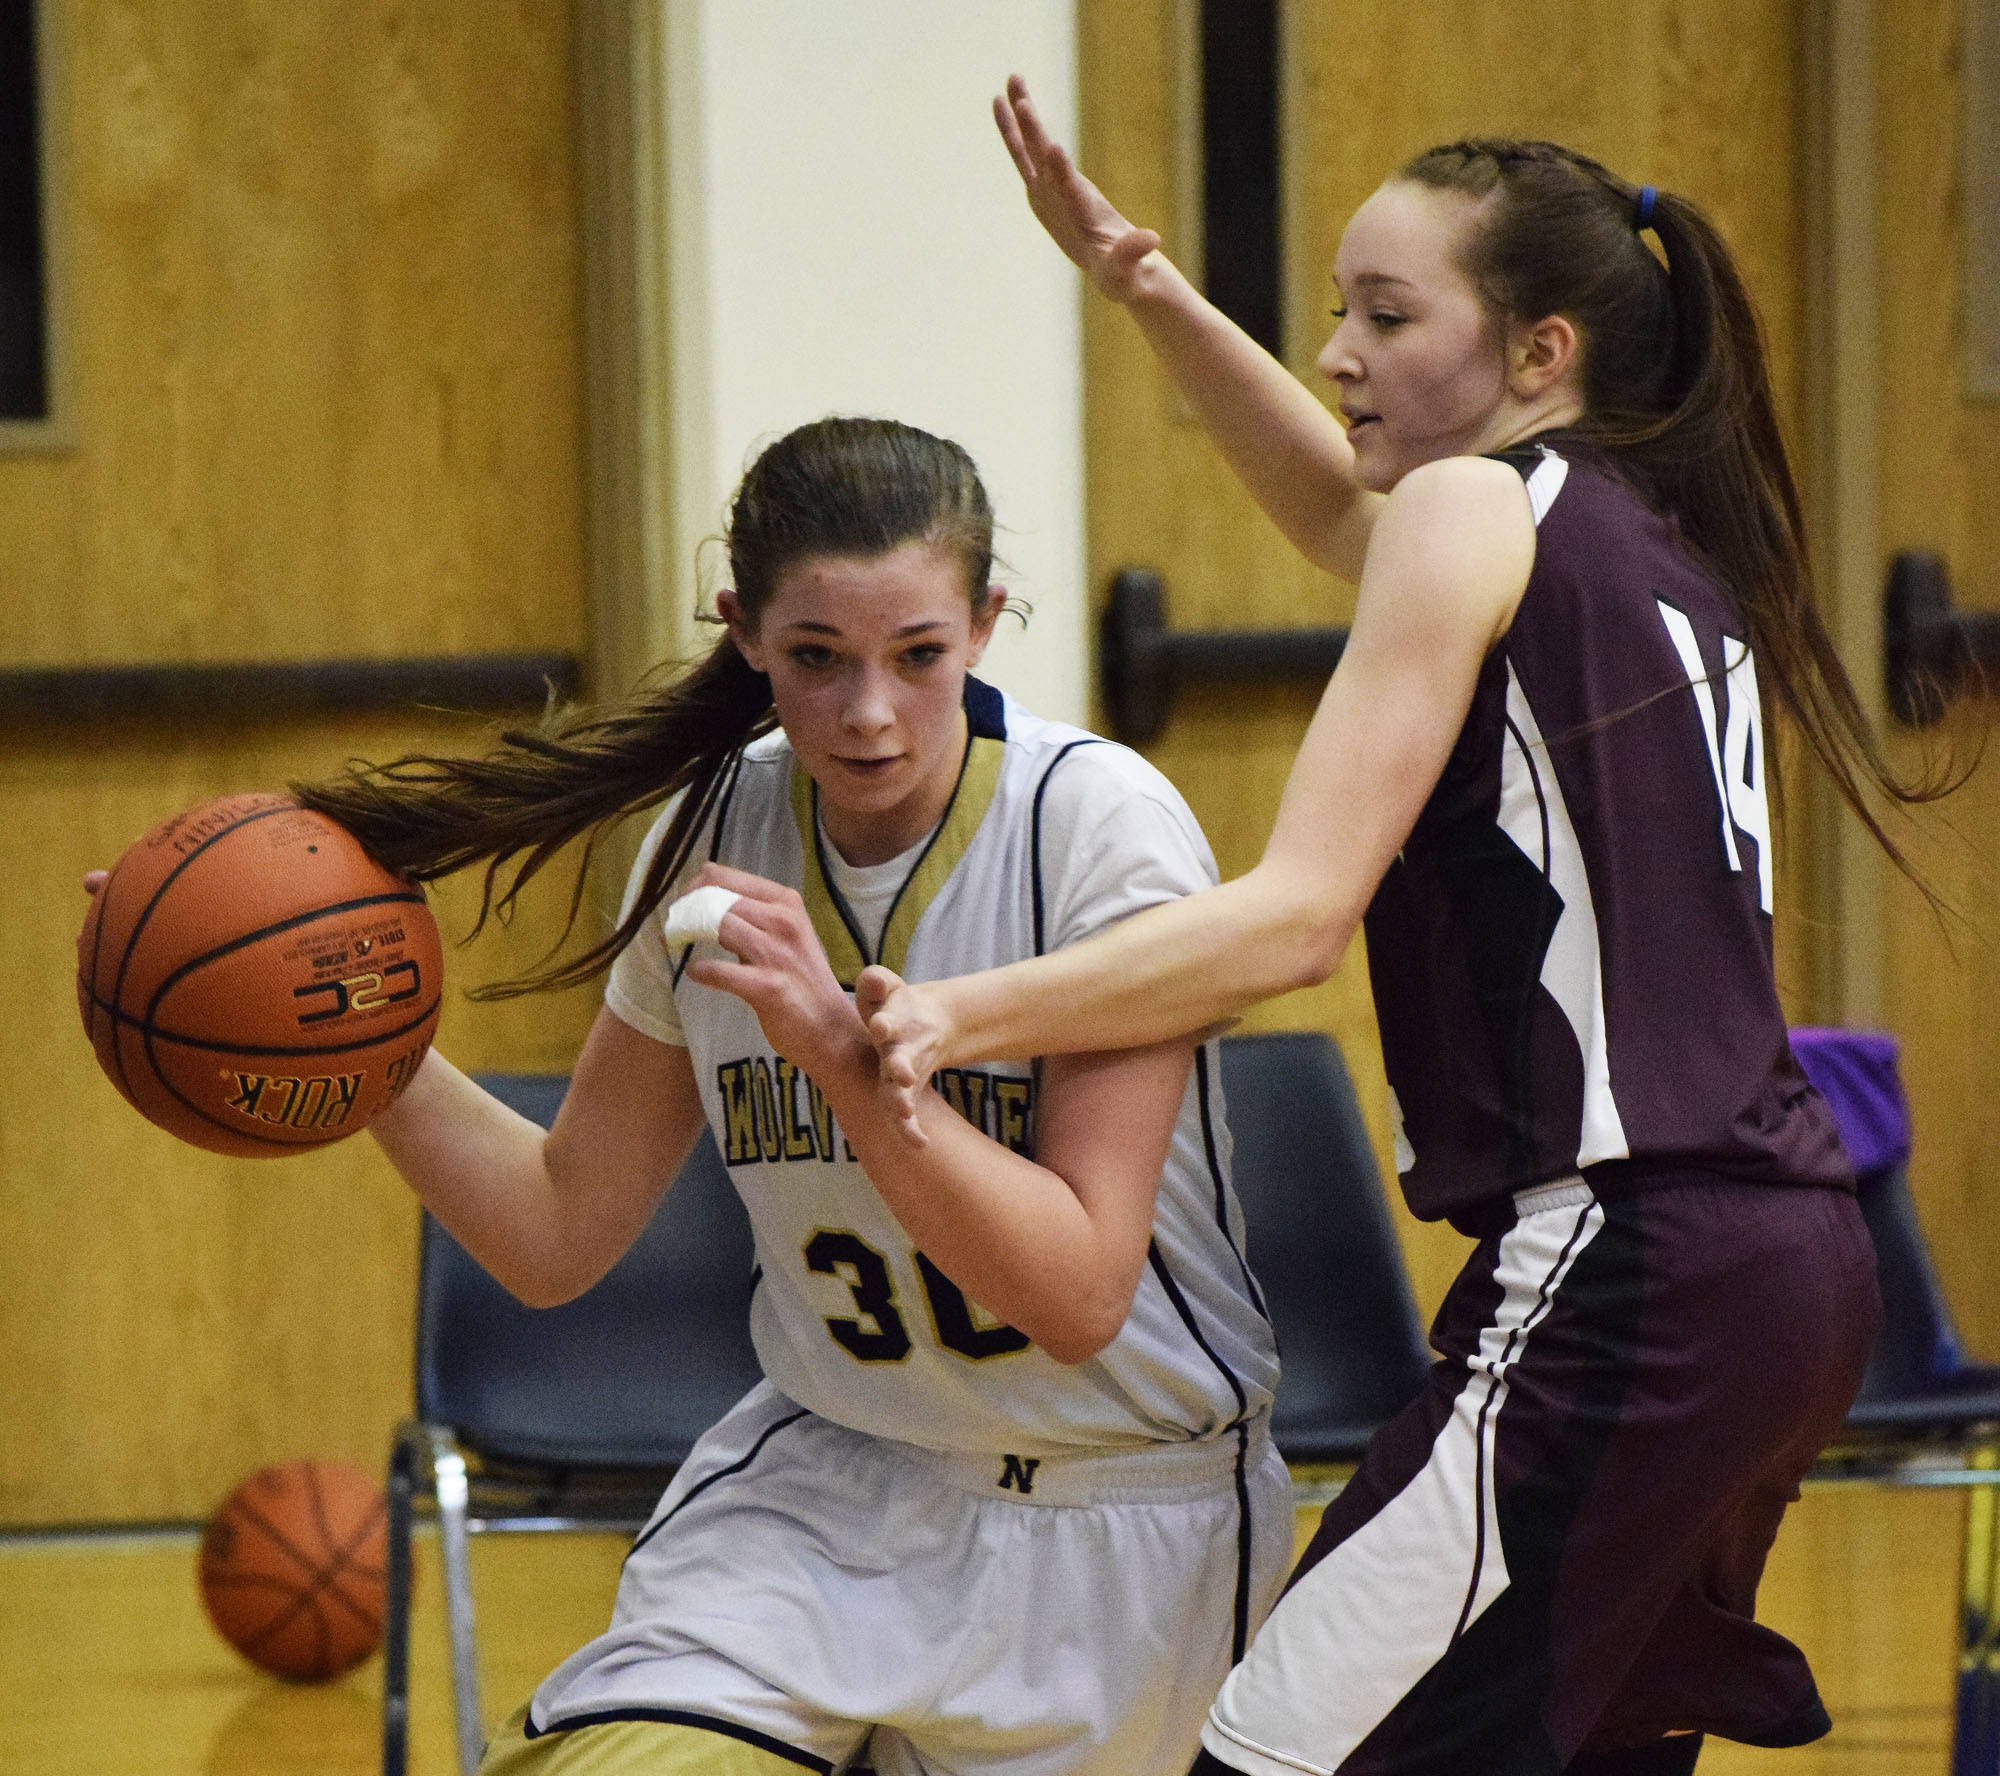 Ninilchik’s DeeAnn White (left) looks for space against Nikolaevsk’s Elizabeth Fefelov in the second half of Friday’s Peninsula Conference girls championship game at Homer High School. (Photo by Joey Klecka/Peninsula Clarion)